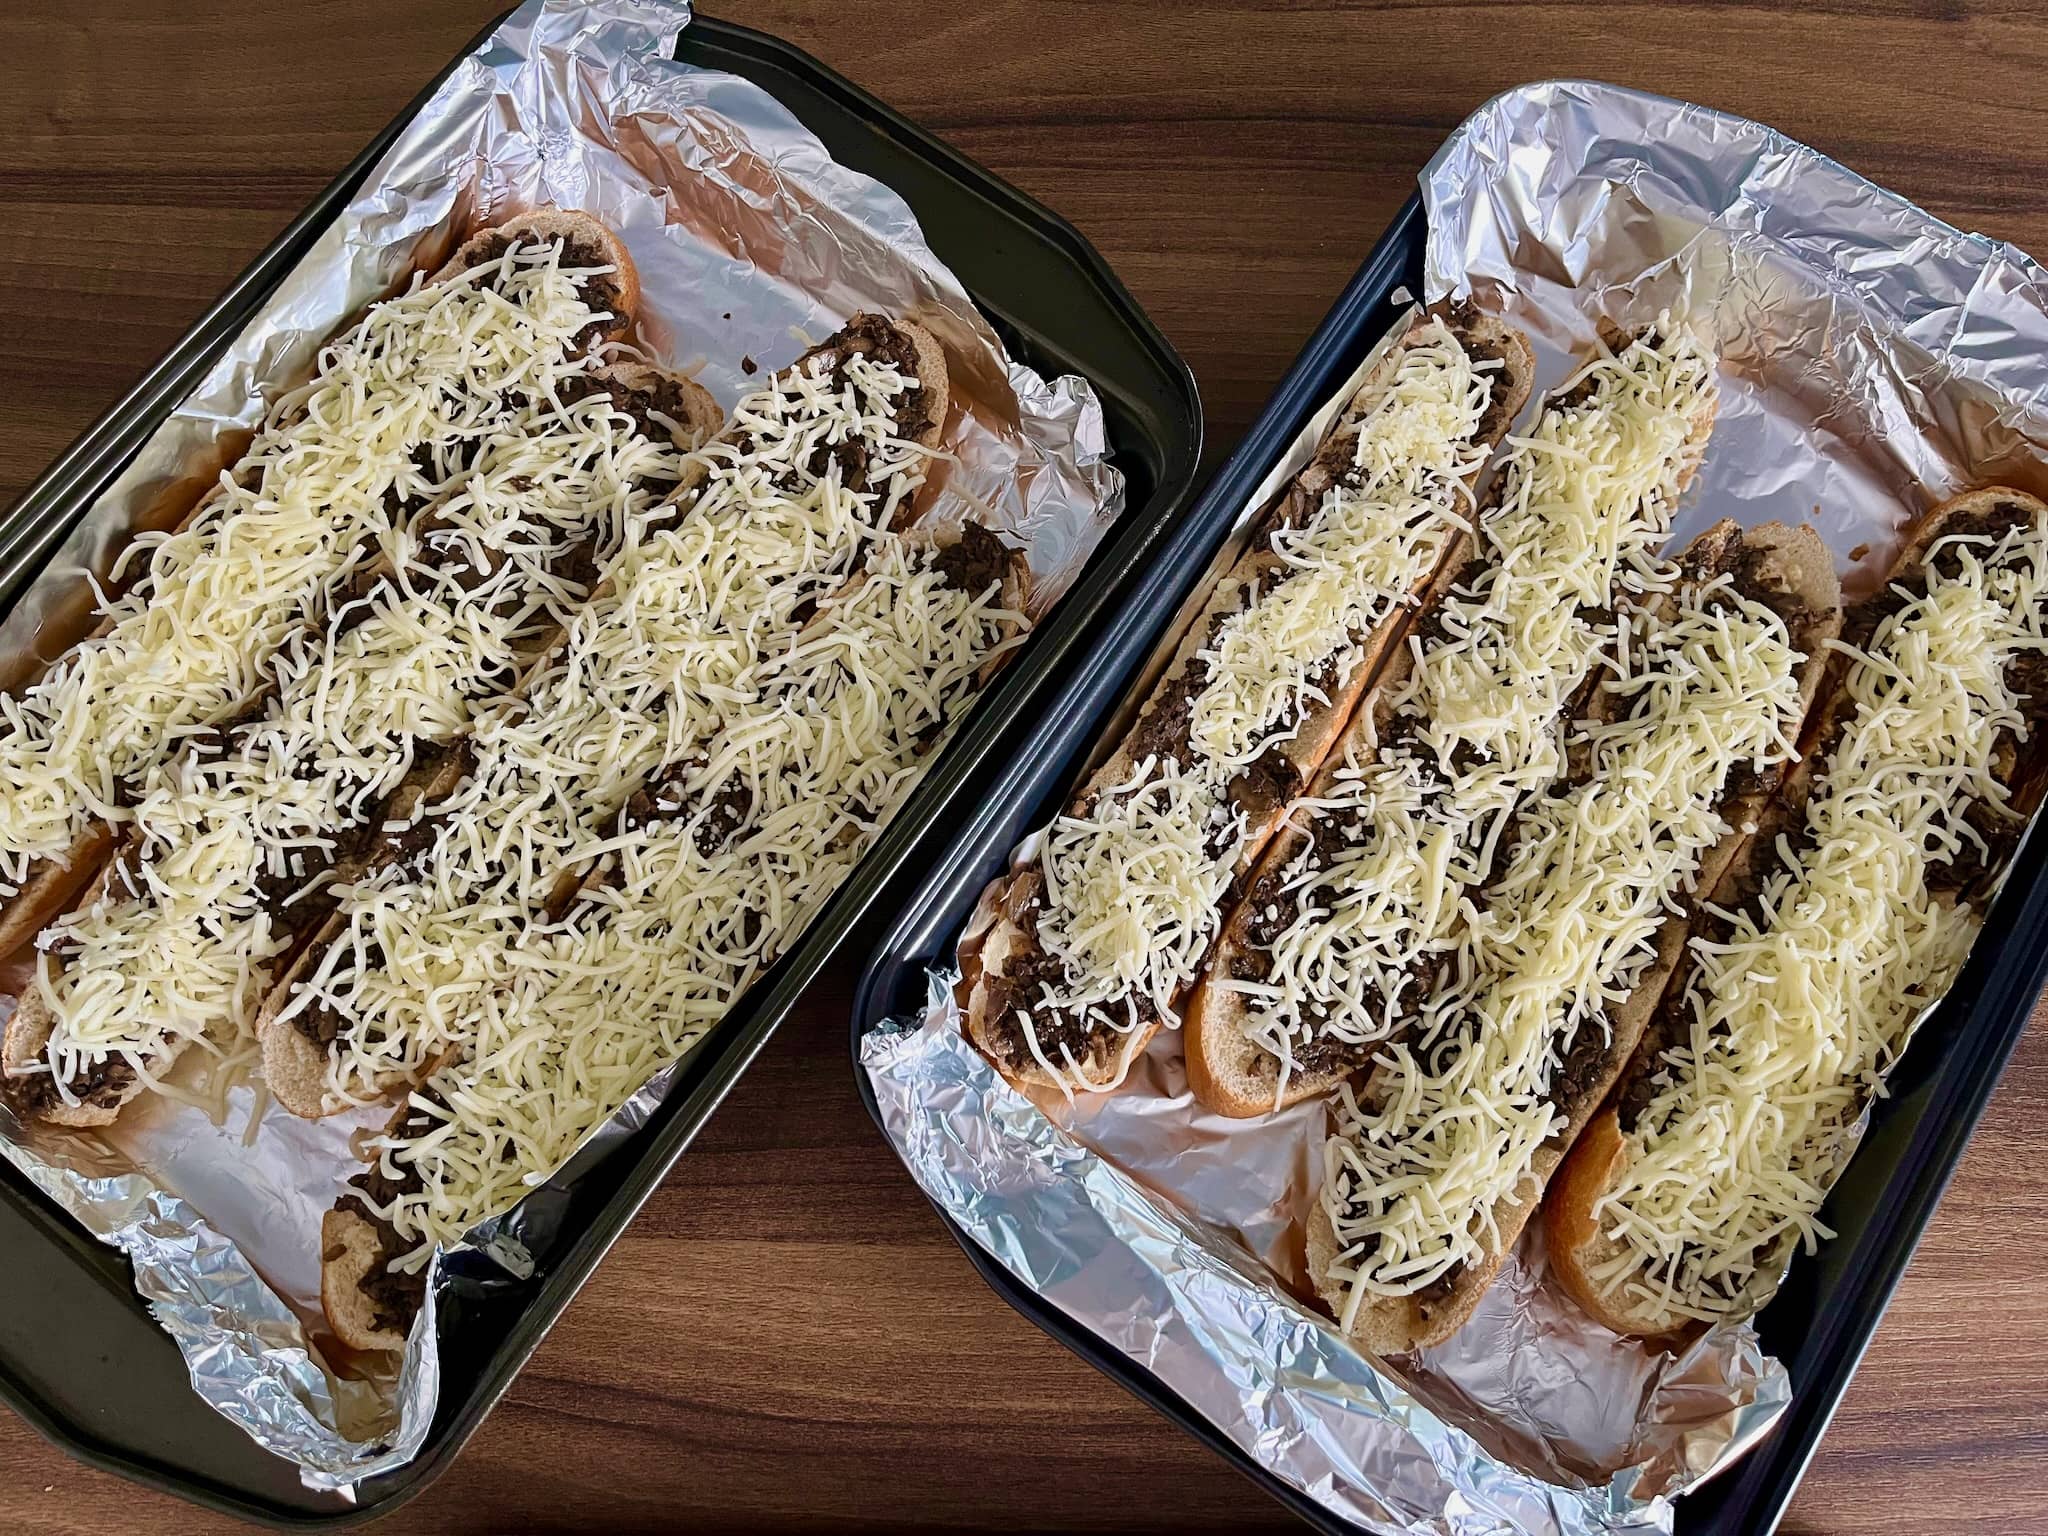 Baguettes with mushrooms sprinkled with cheese ready to bake